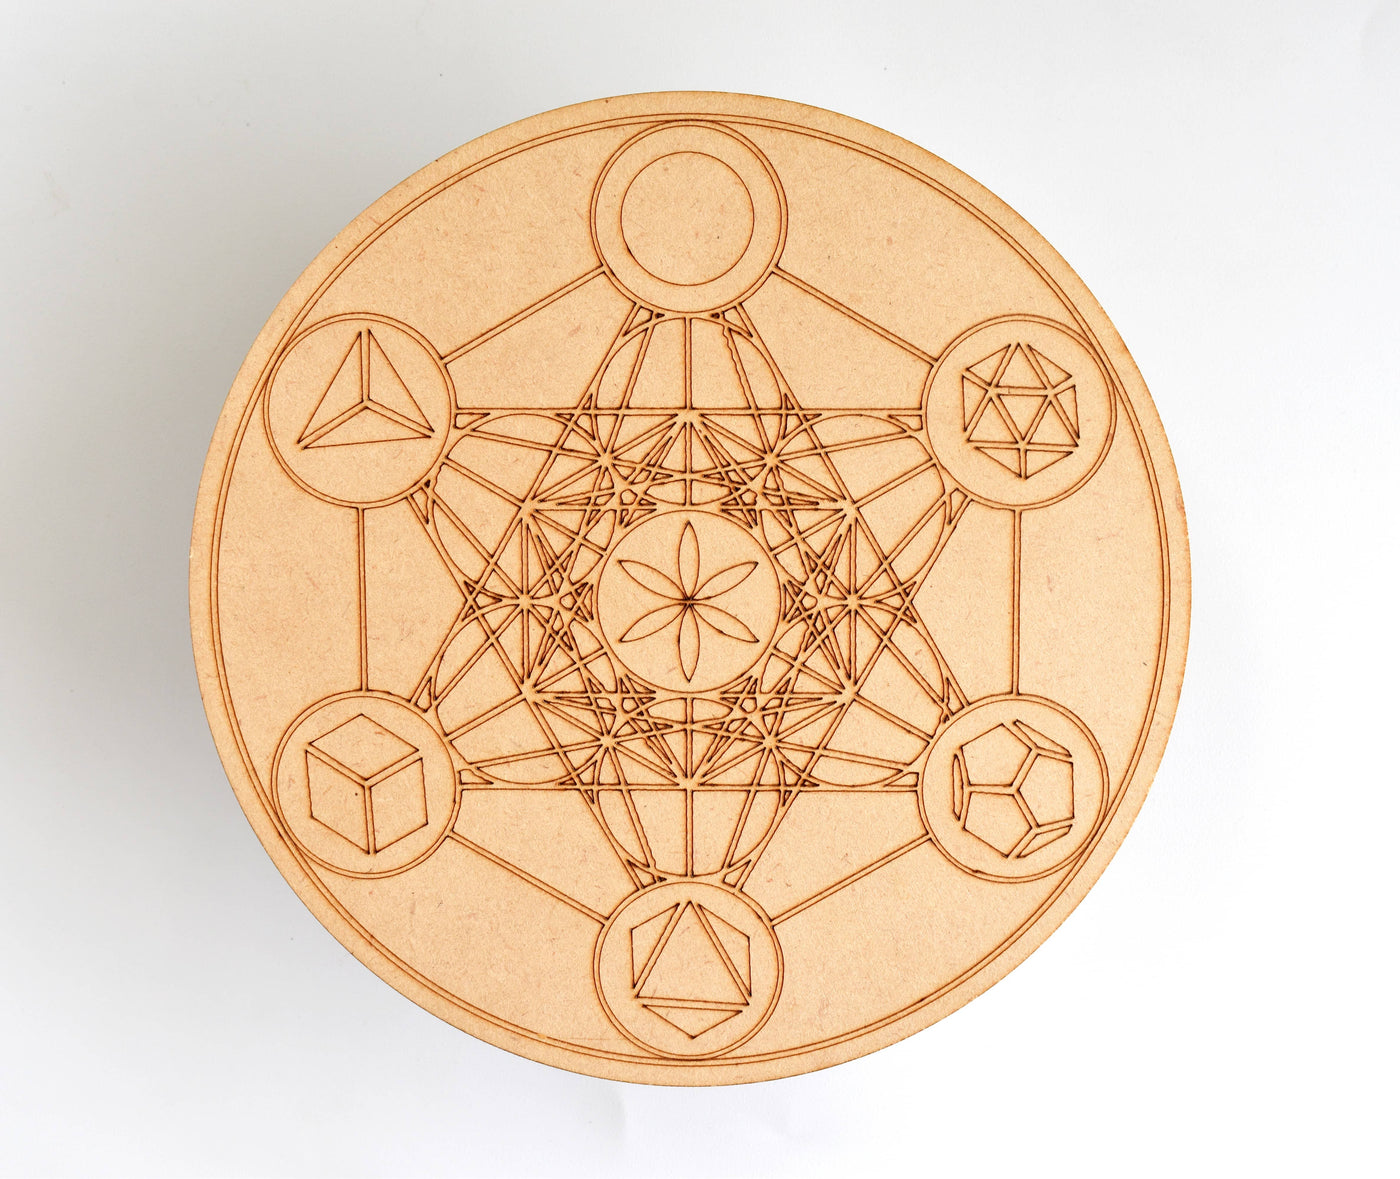 Tree of Life with 7 Chakras Crystal Grid Board, 6" Wooden Crystal Grid Plate